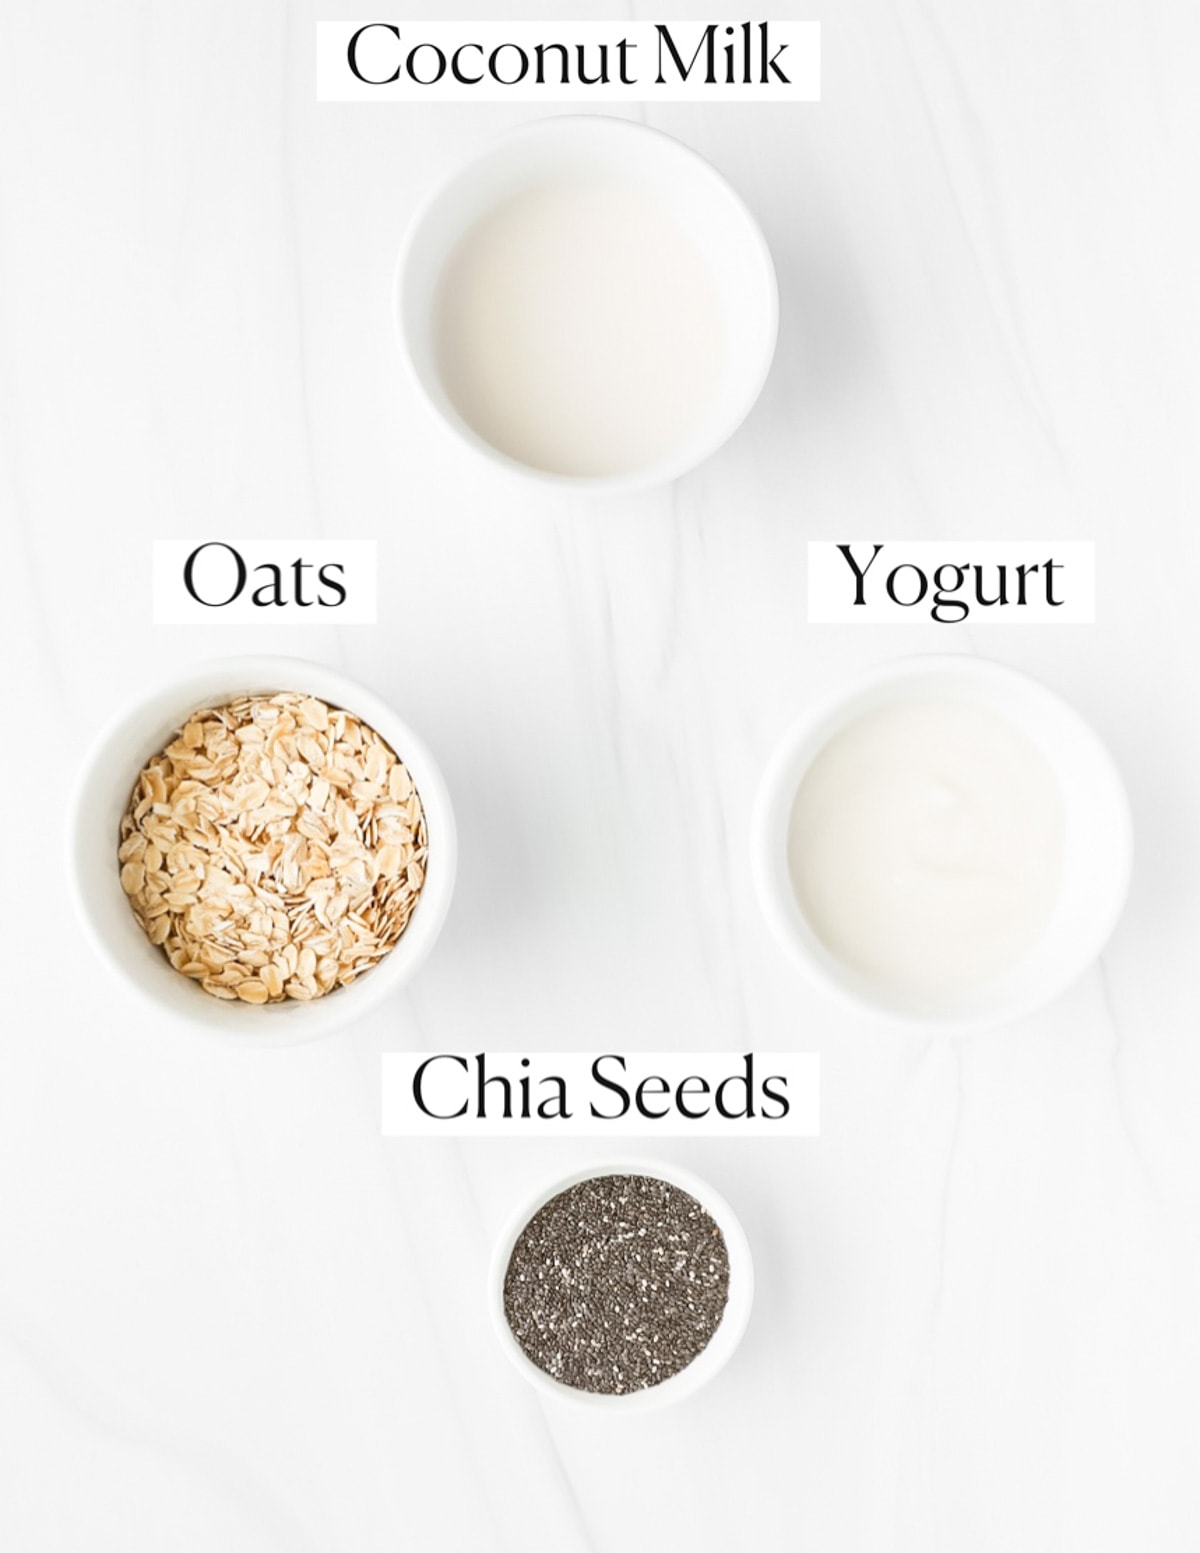 Labeled ingredients in small white bowls including: coconut milk, oats, yogurt, and chia seeds.